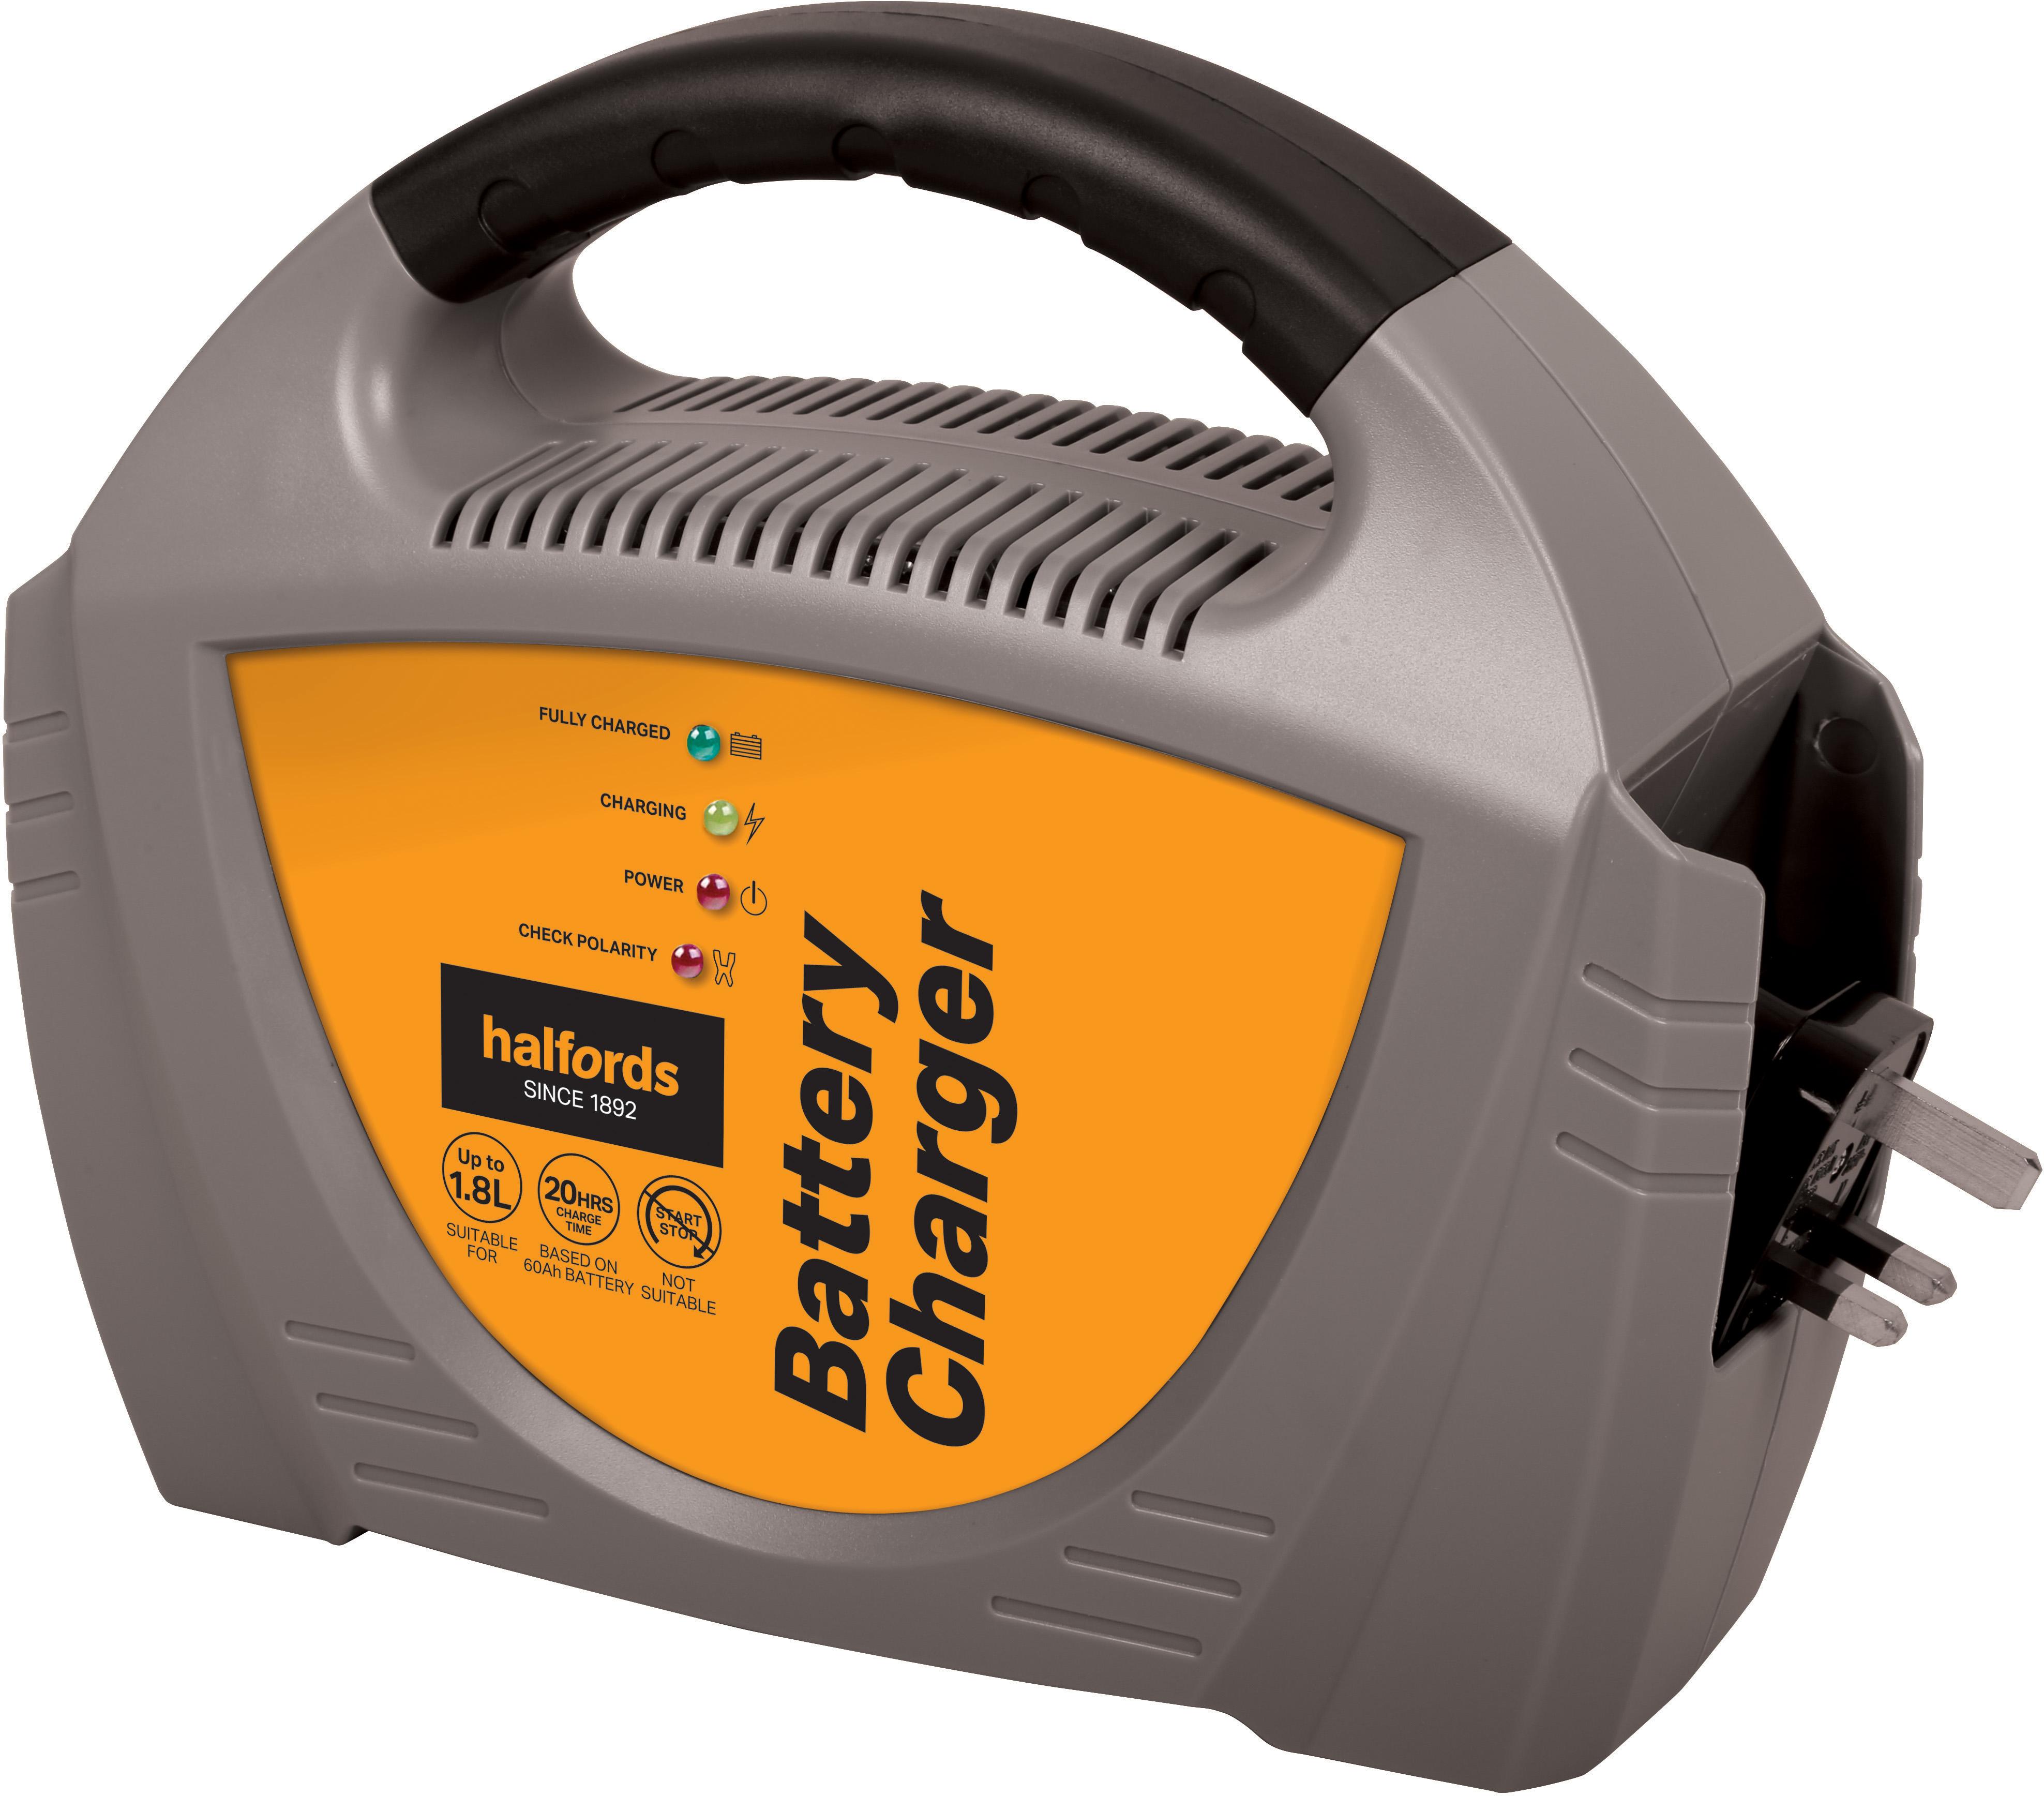 Halfords Car Battery Charger - Up To 1.8L